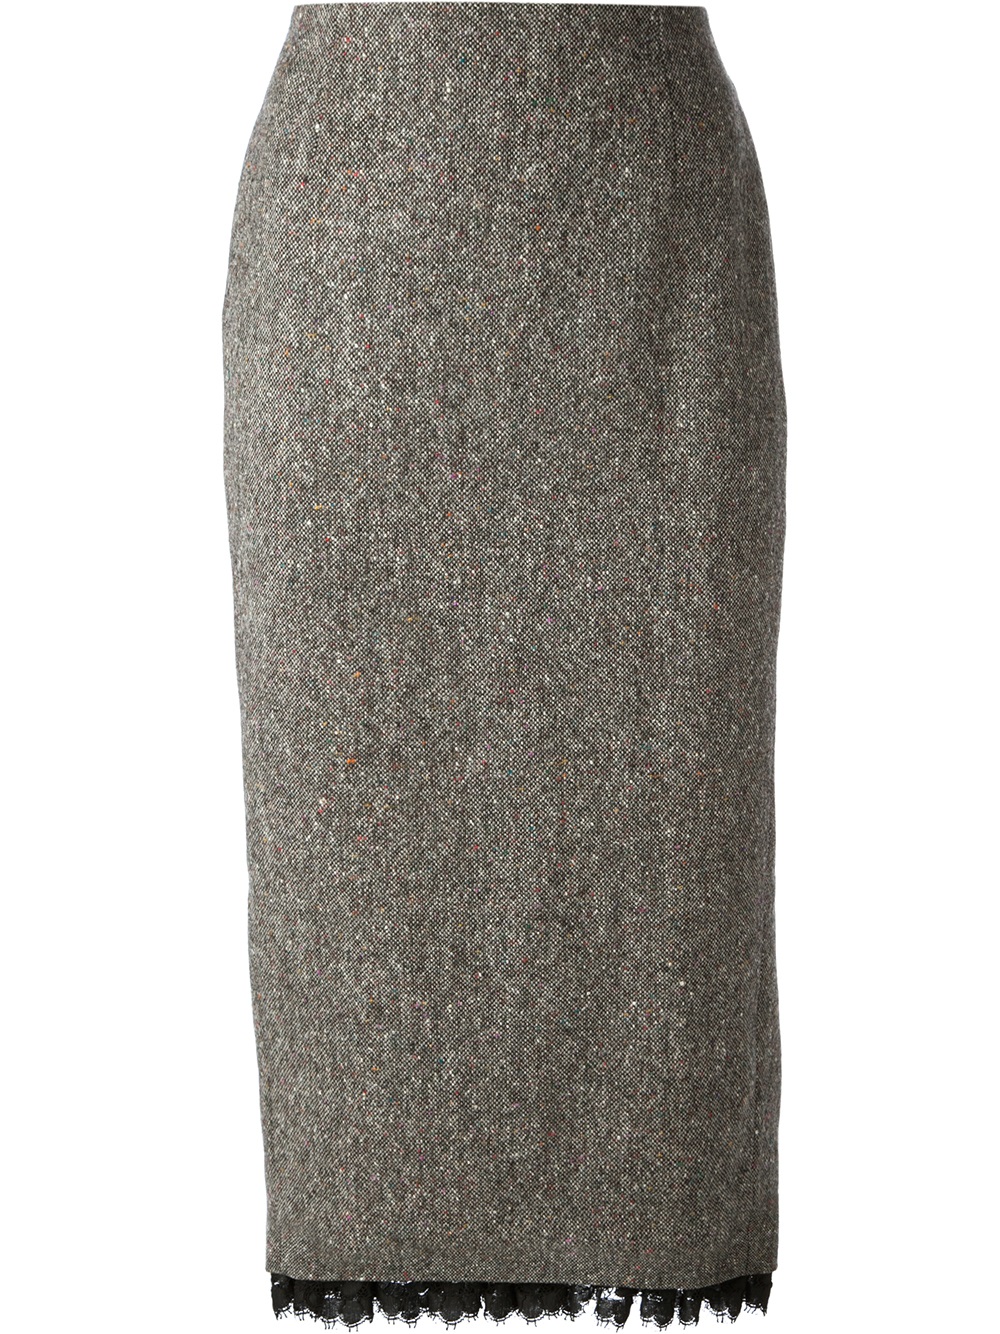 Lyst - Dsquared² Lace Trim Pencil Skirt in Gray